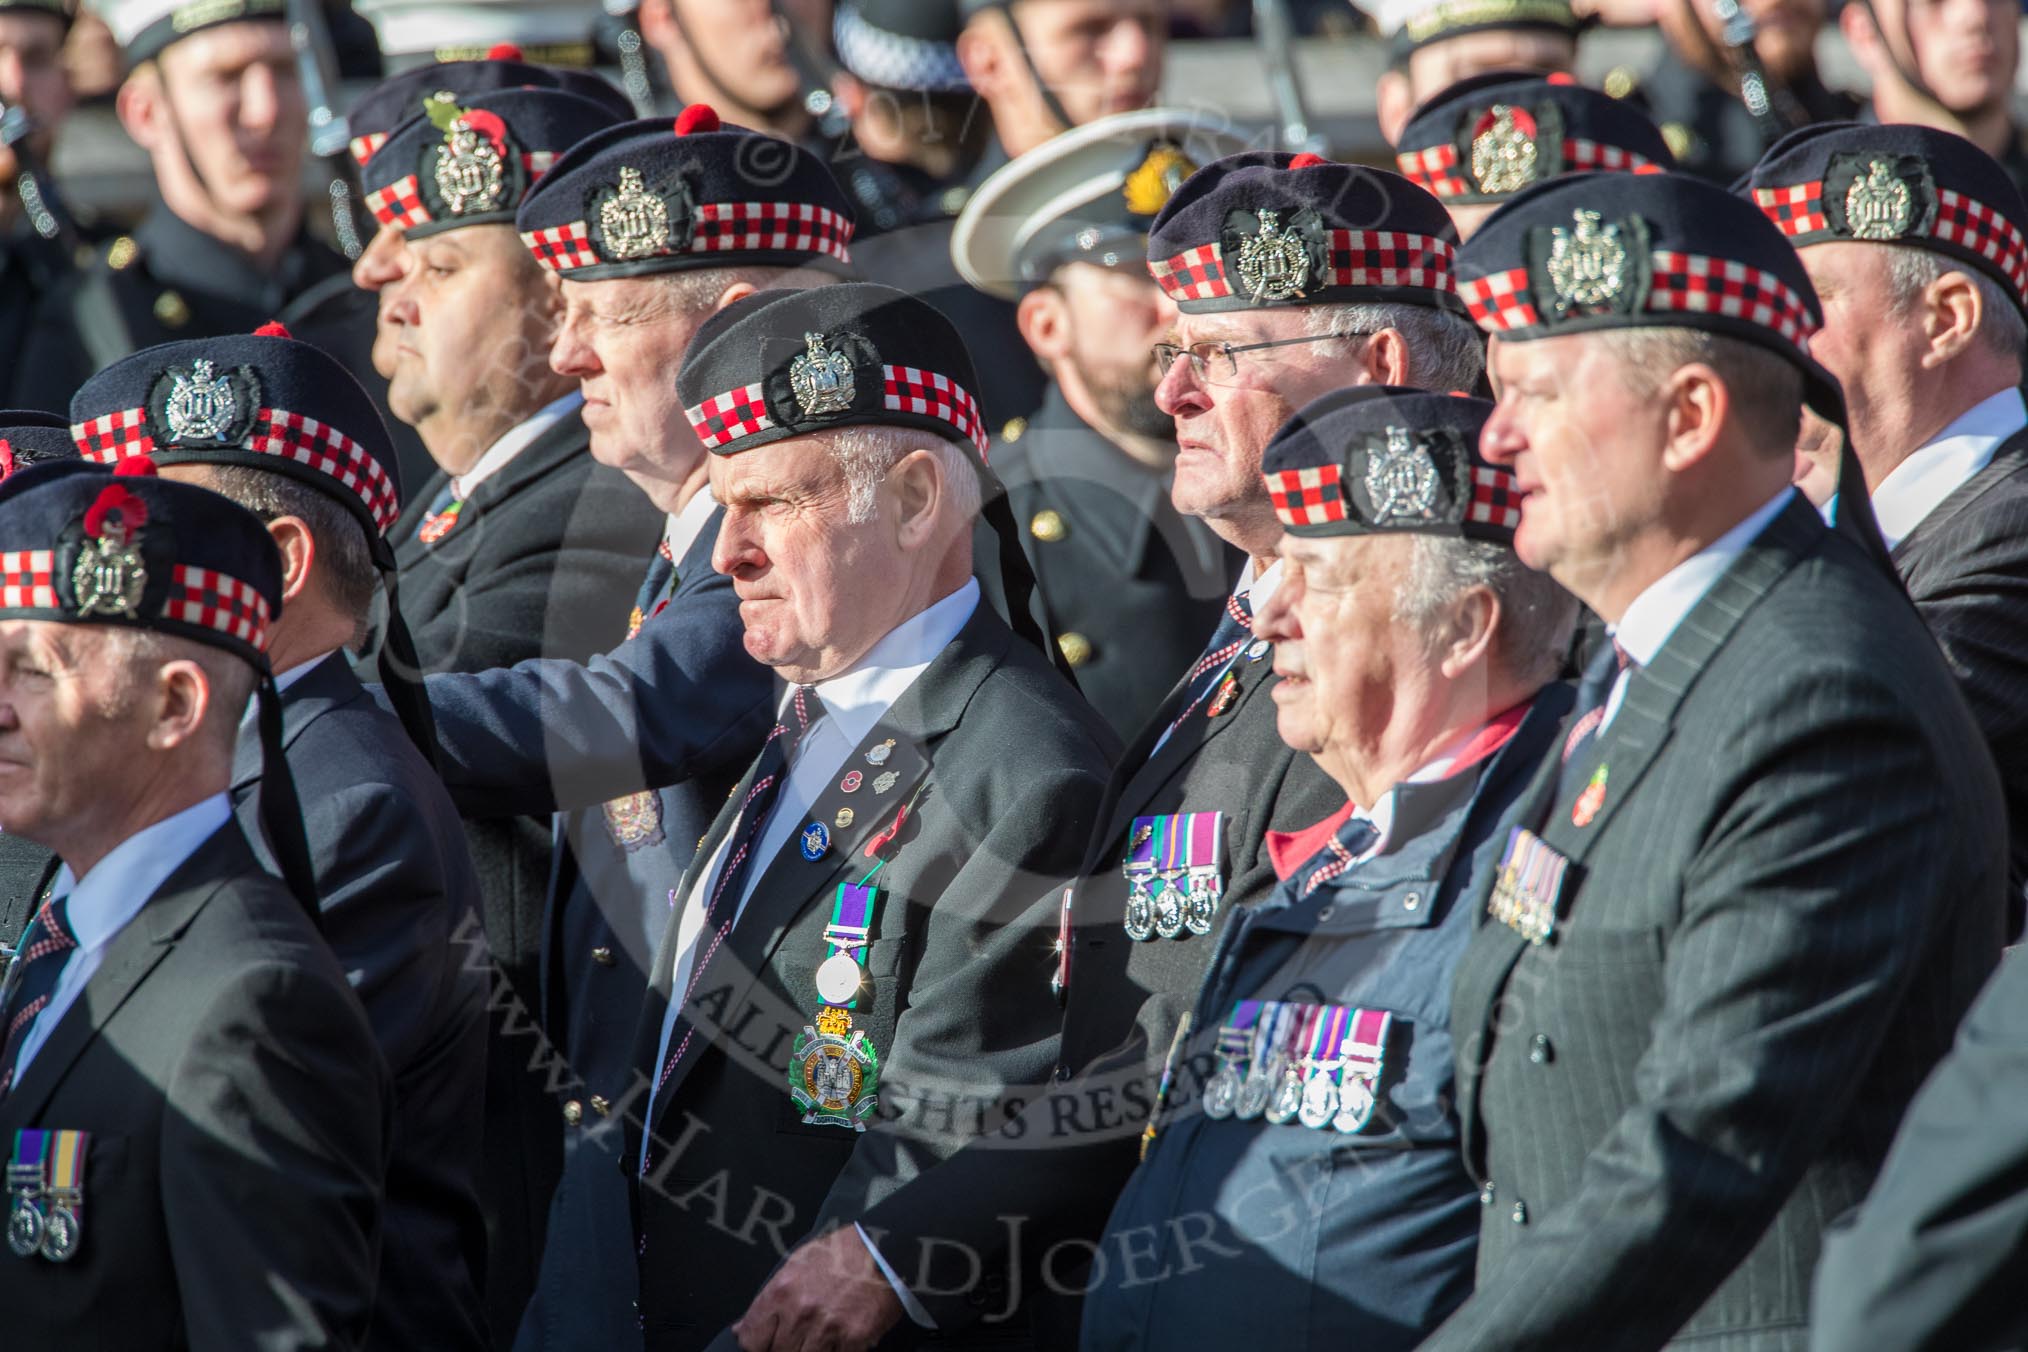 KOSB -The Kings Own Scottish Borderers Association (Group A9, 75 members) during the Royal British Legion March Past on Remembrance Sunday at the Cenotaph, Whitehall, Westminster, London, 11 November 2018, 11:57.